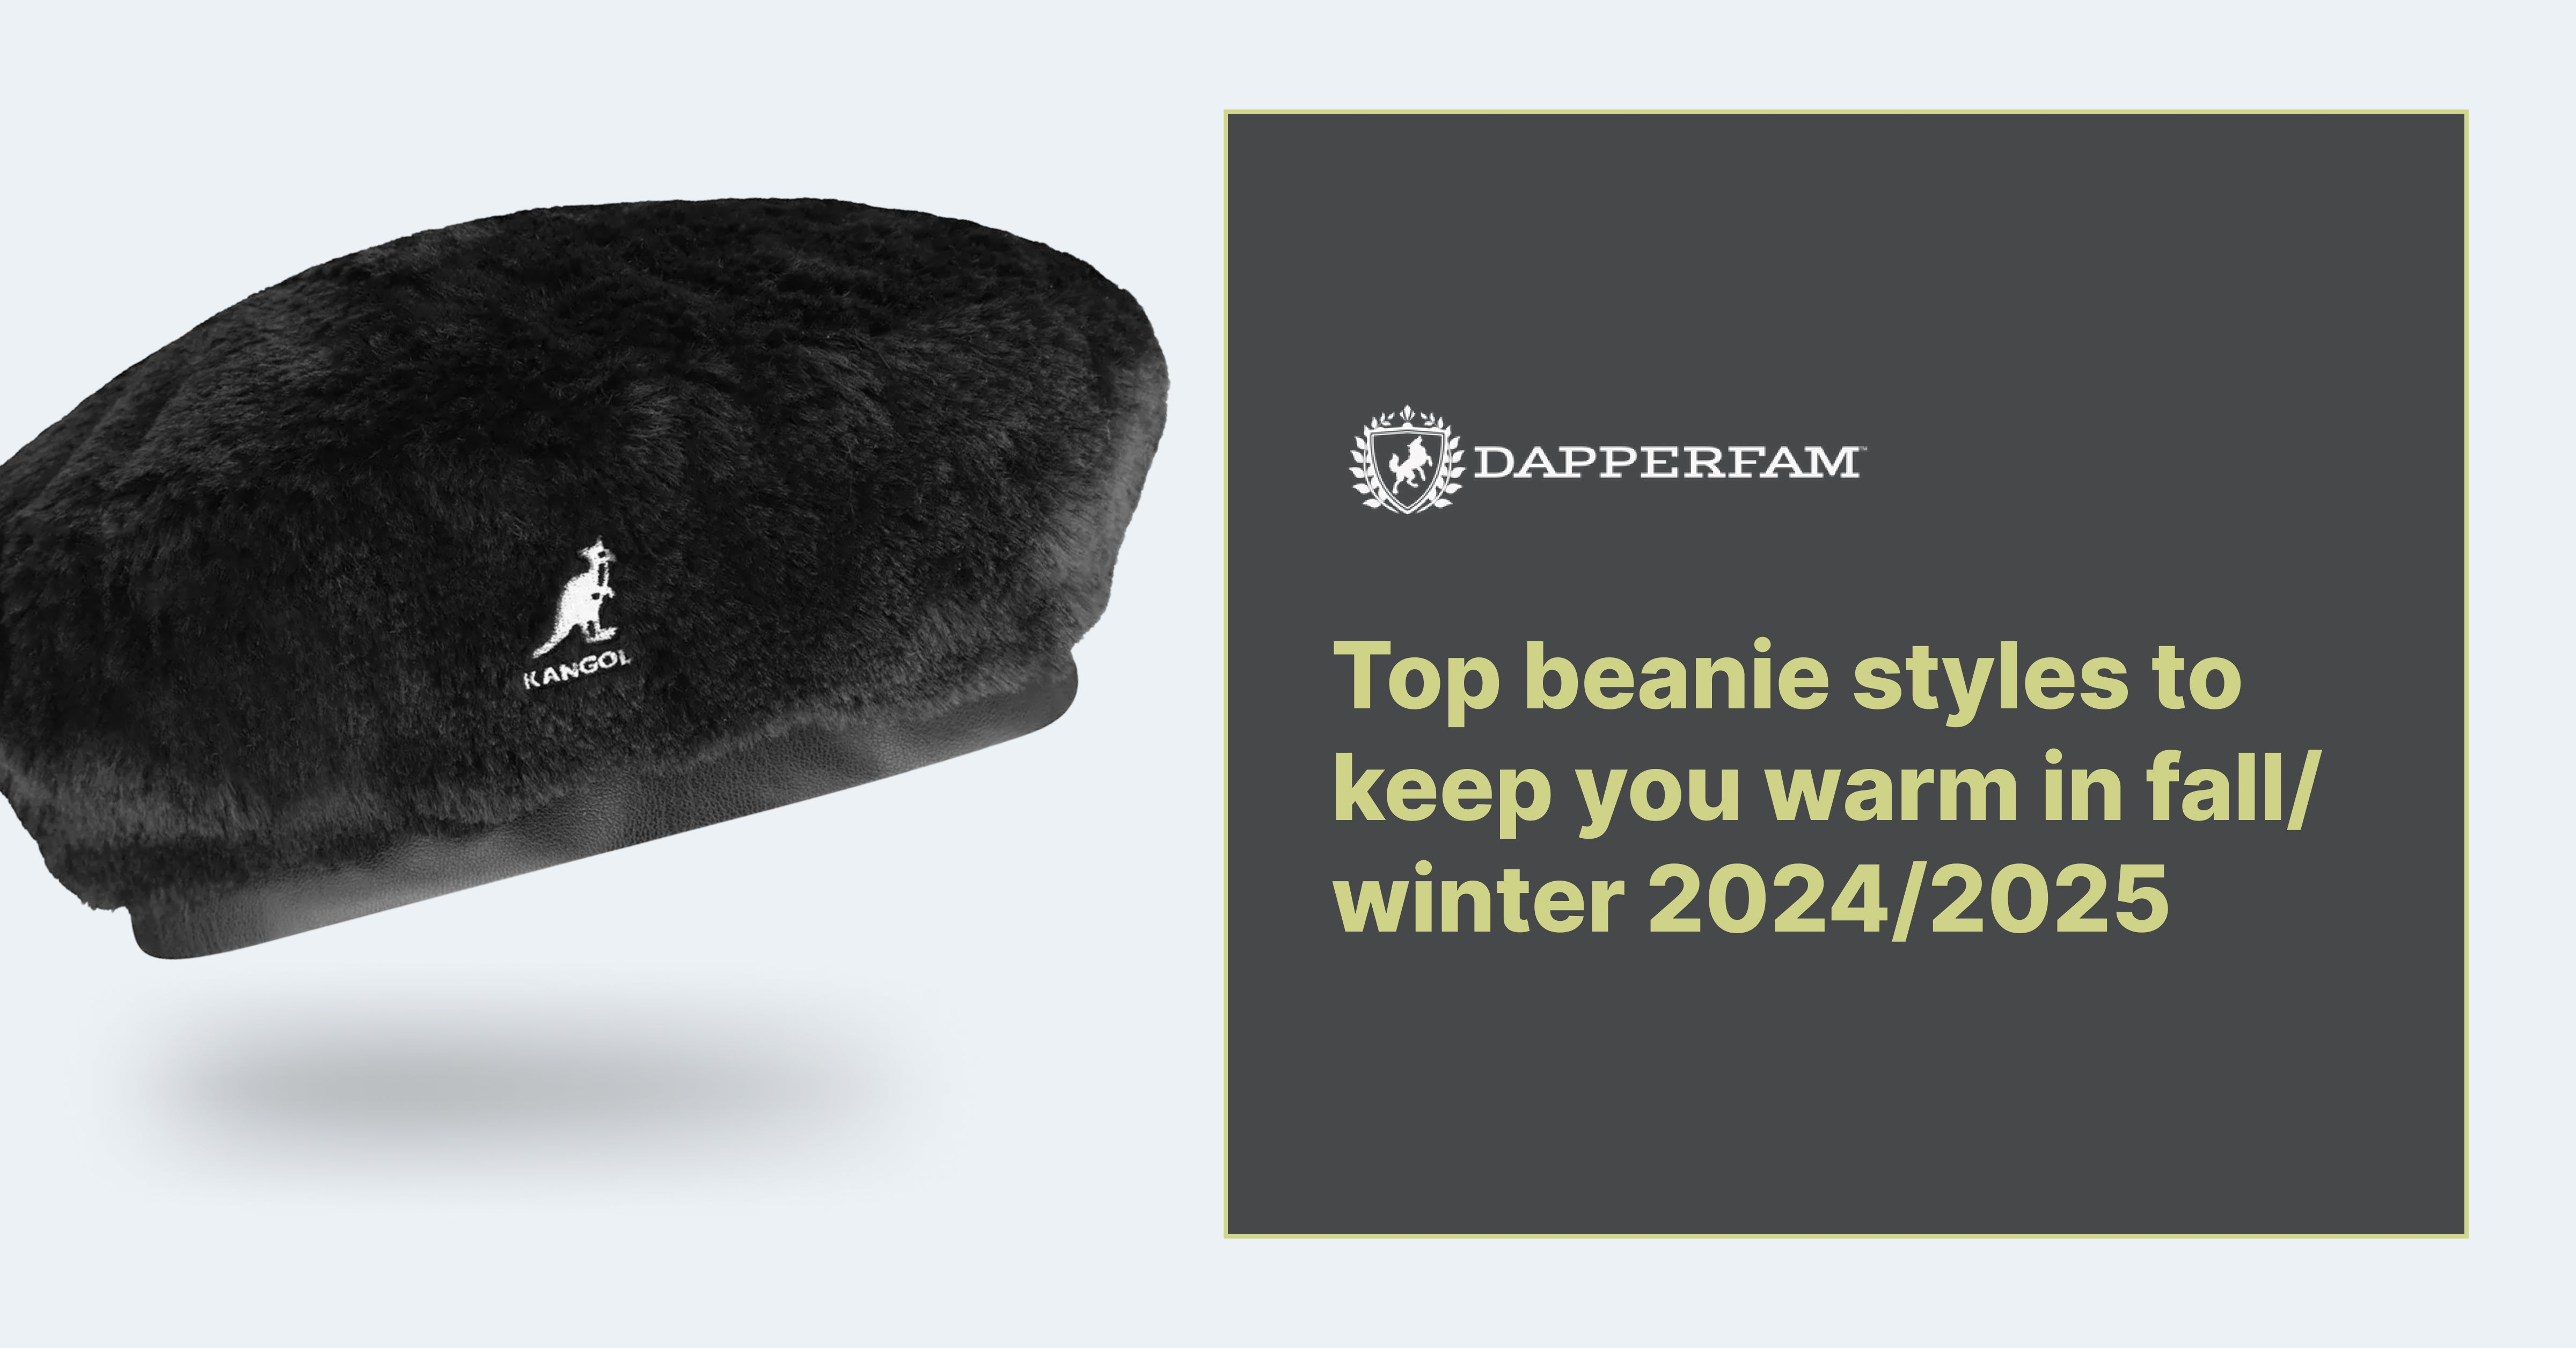 Top beanie styles to keep you warm in fall/winter 2024/2025 – DAPPERFAM